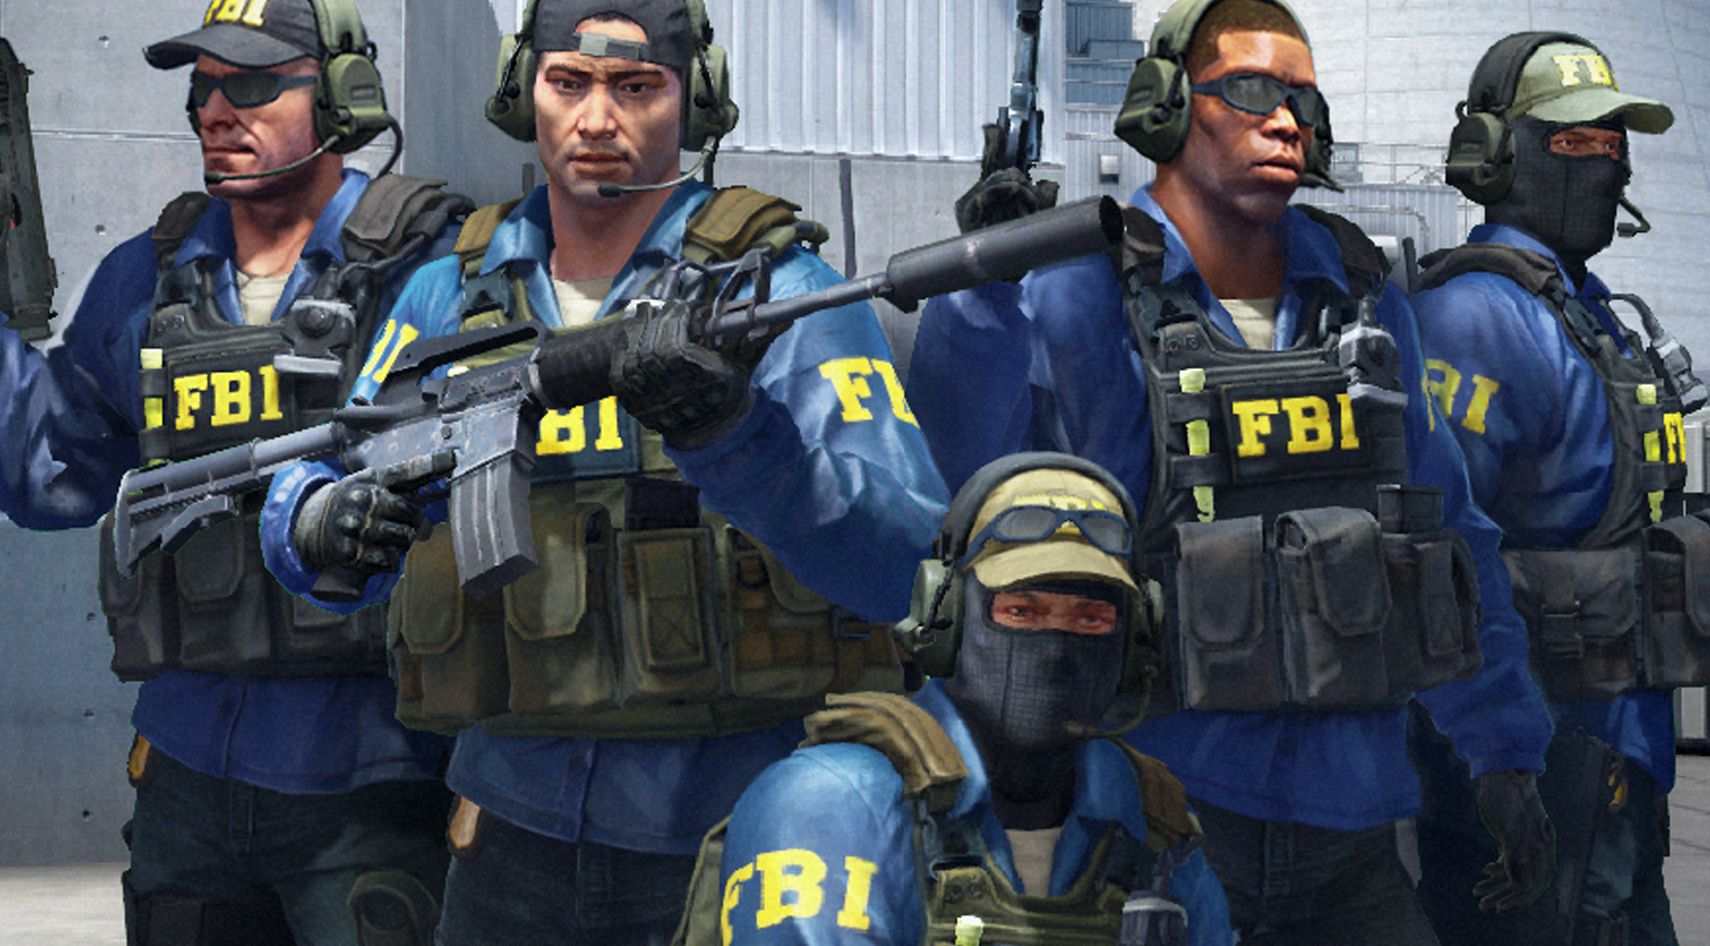 Steam accidentally removes Counter Strike: Global Offensive from its store  